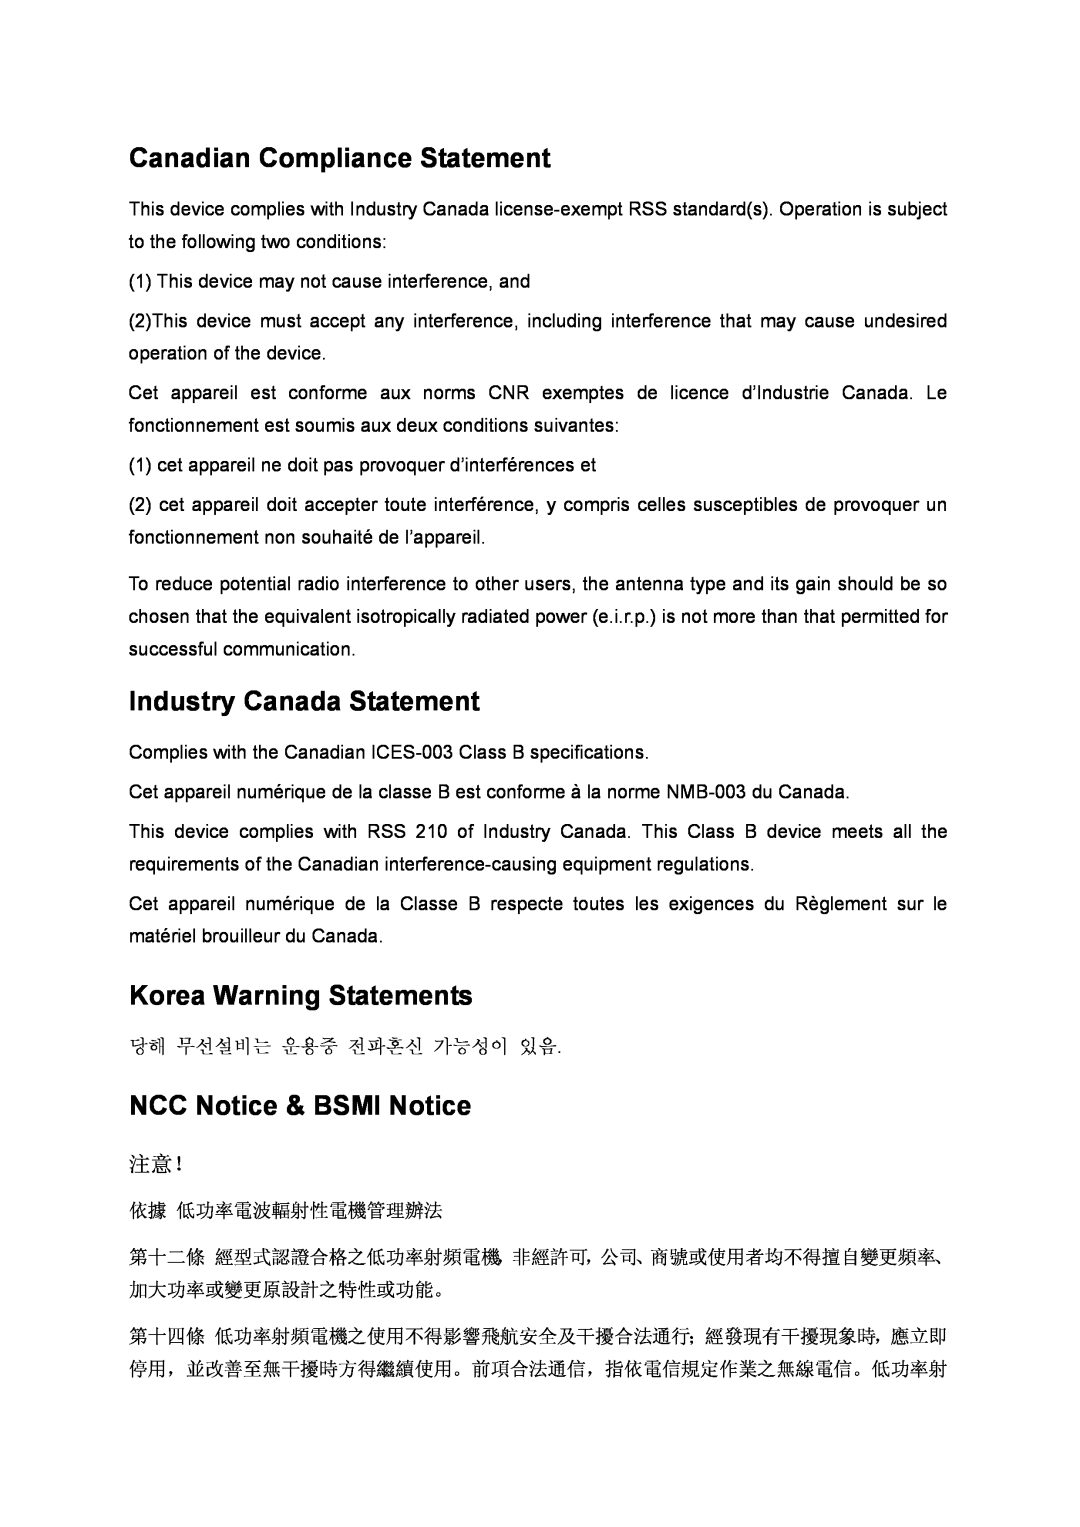 TP-Link AC1750 manual Canadian Compliance Statement, Industry Canada Statement, Korea Warning Statements 